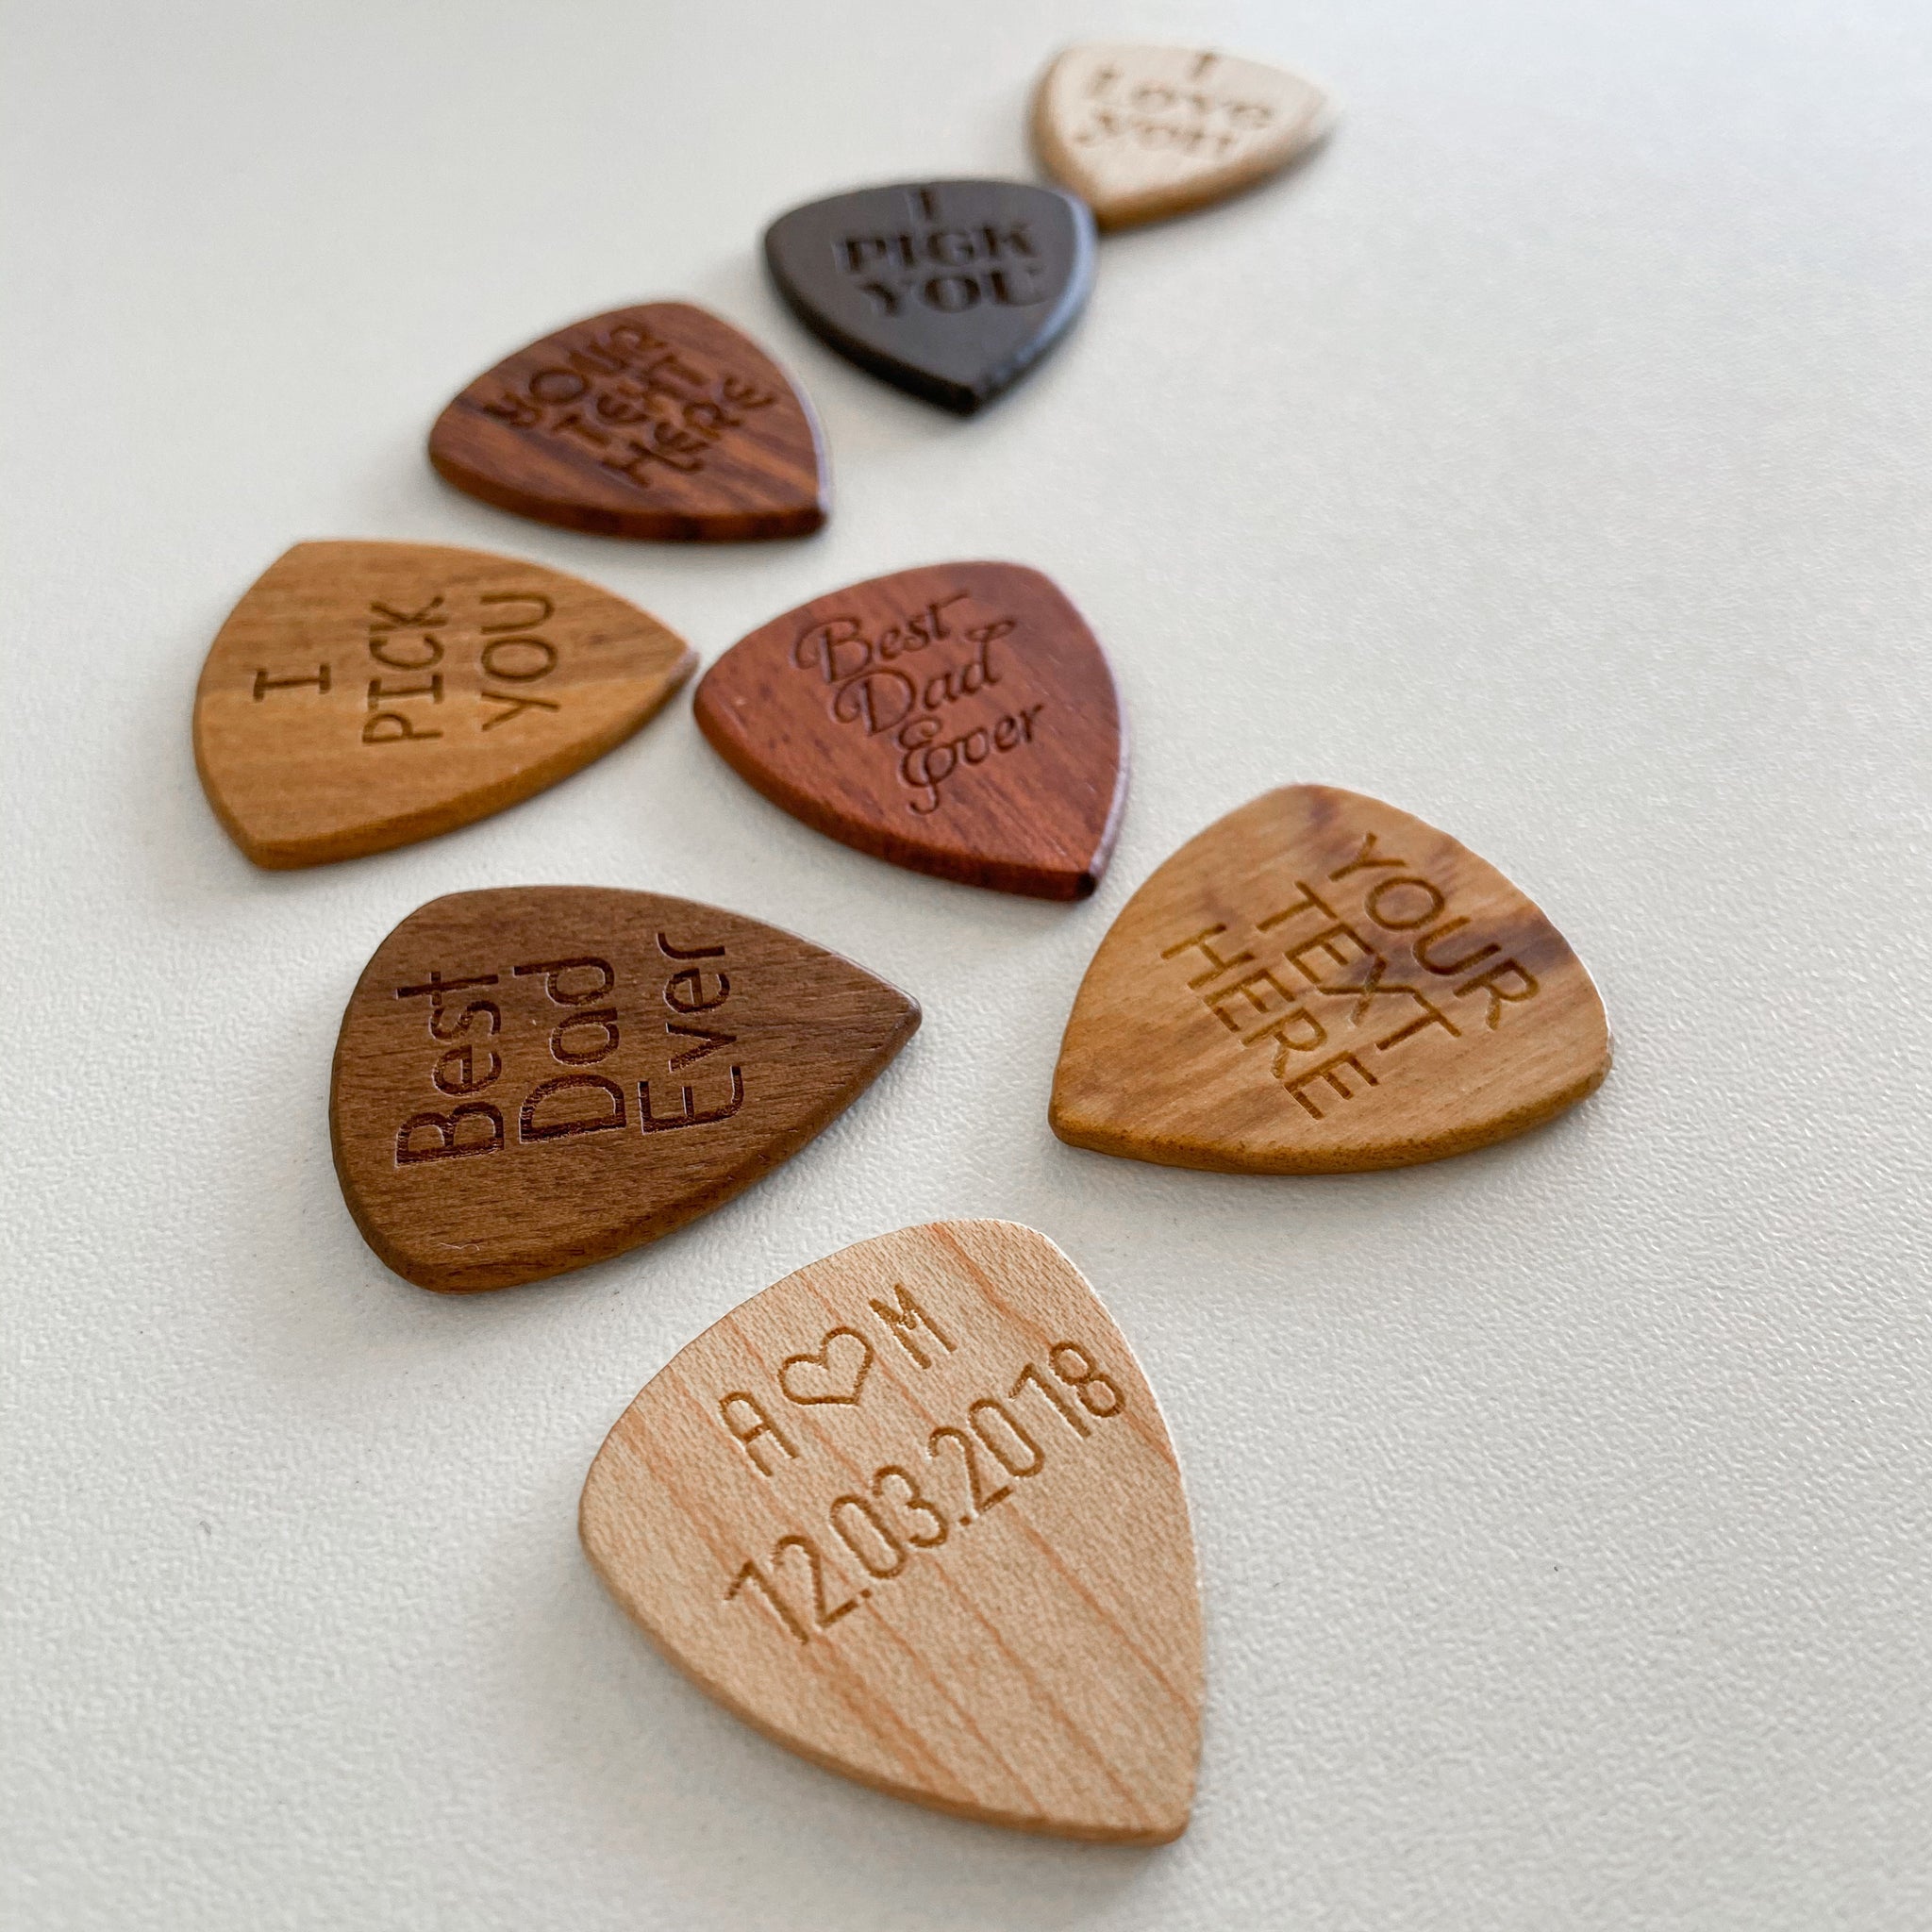 Personalized Guitar Picks are Meant to Make Beautiful Music - GTA